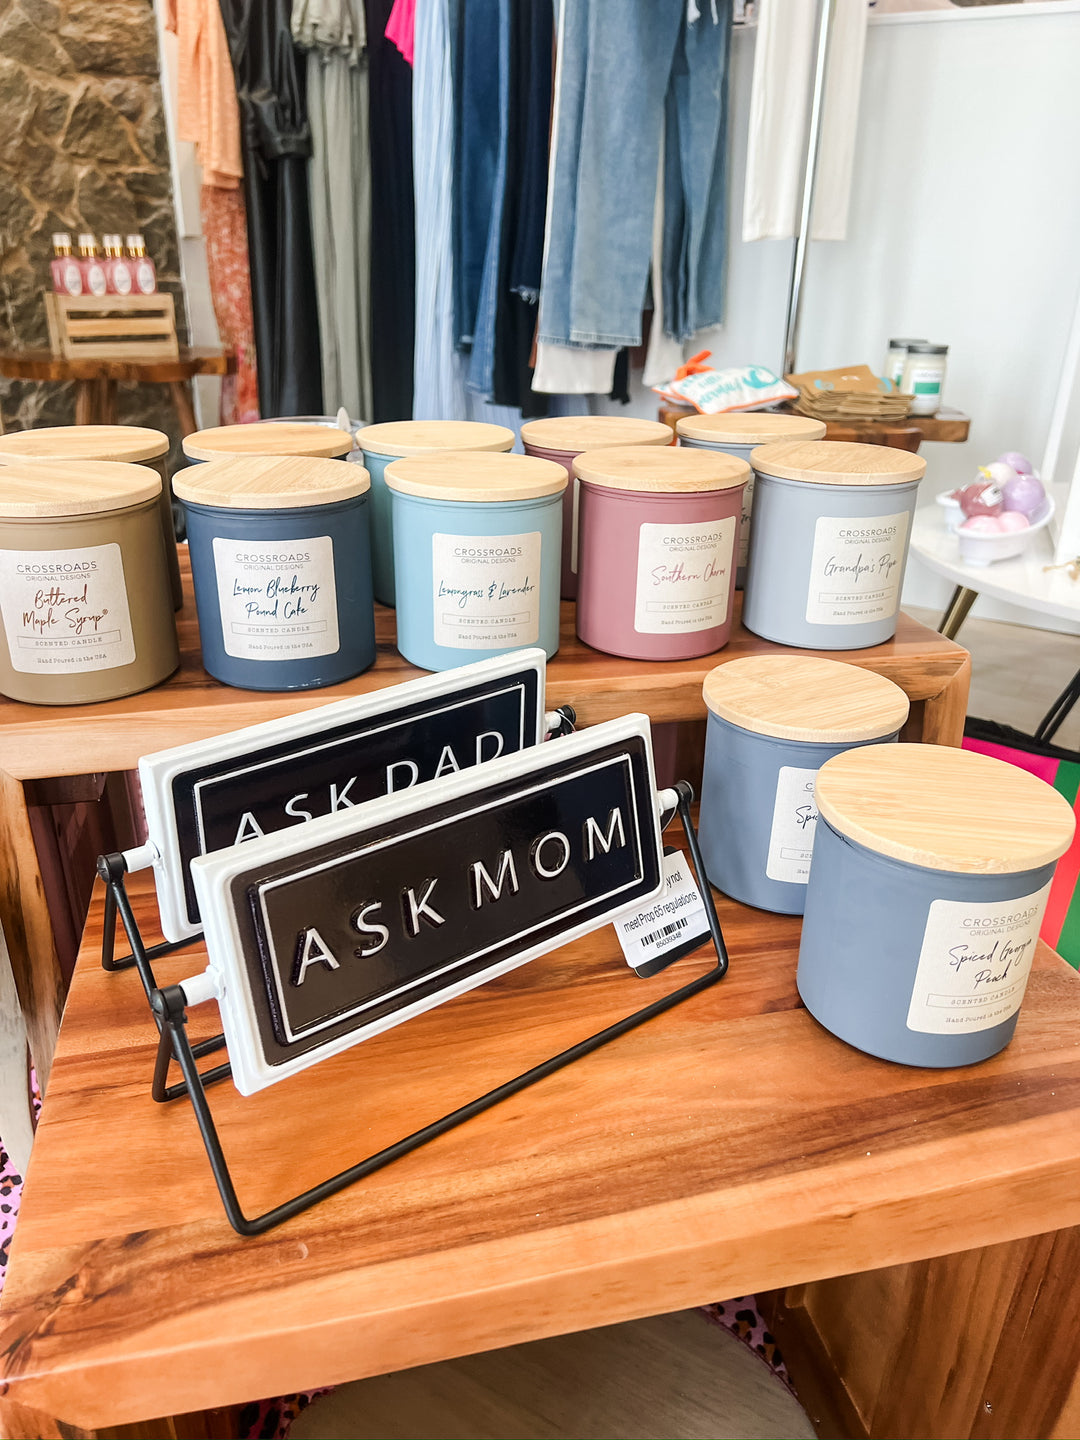 Ask Mom/Ask Dad - The Teal Antler Boutique